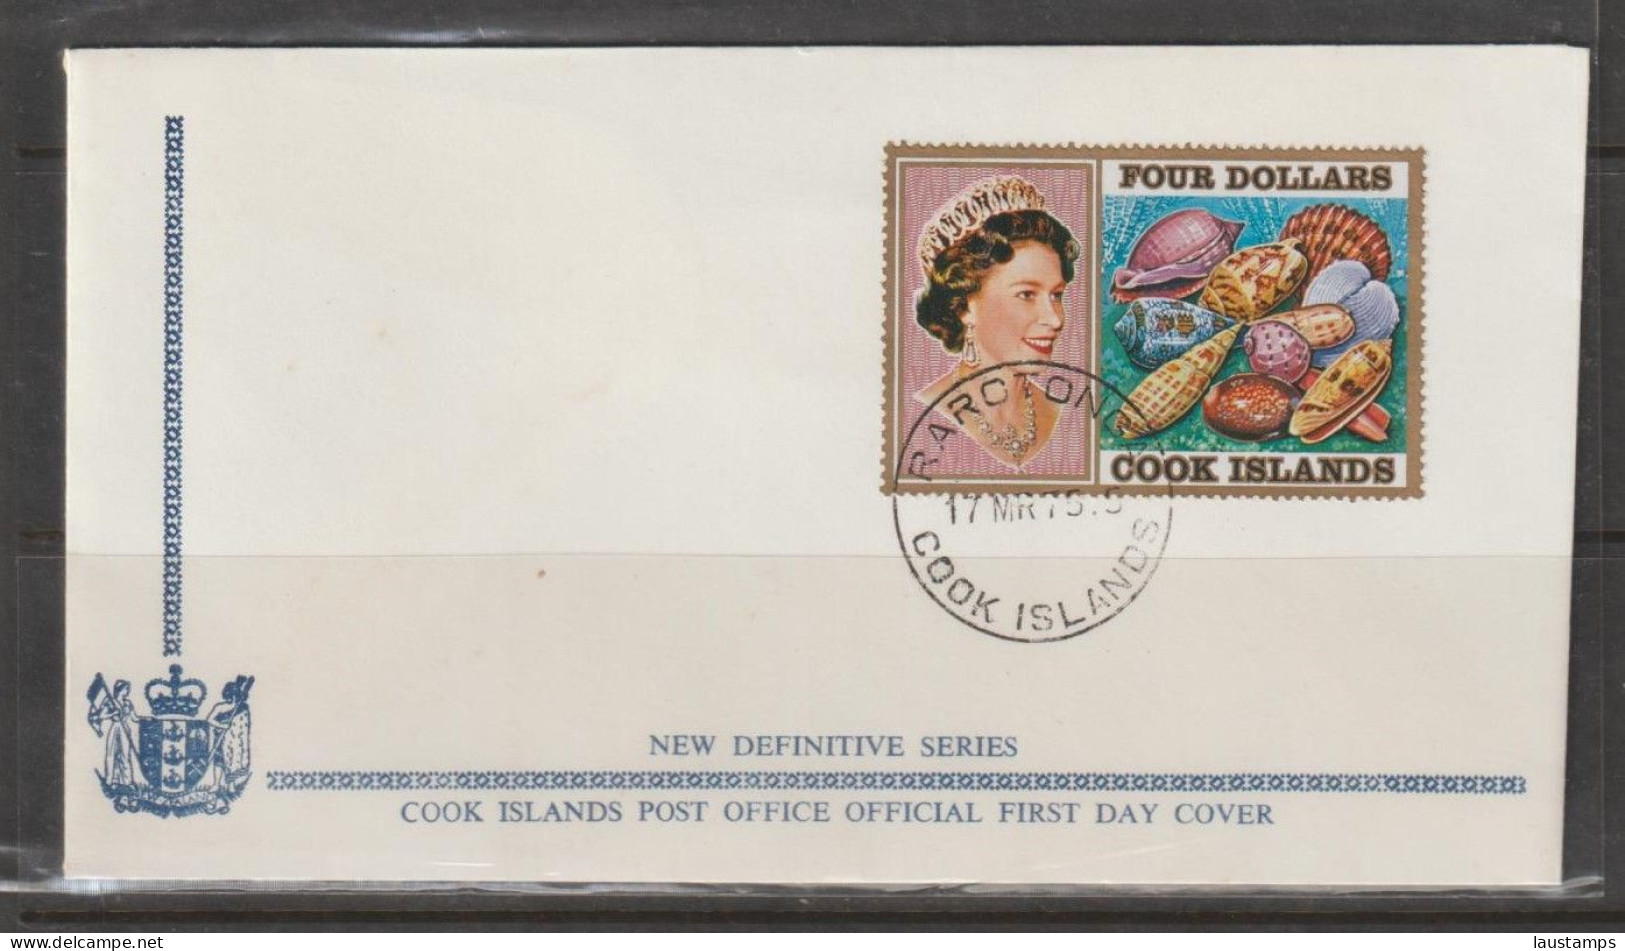 Cook Islands 1974 Shell Definitive Series($4) FDC - Coquillages